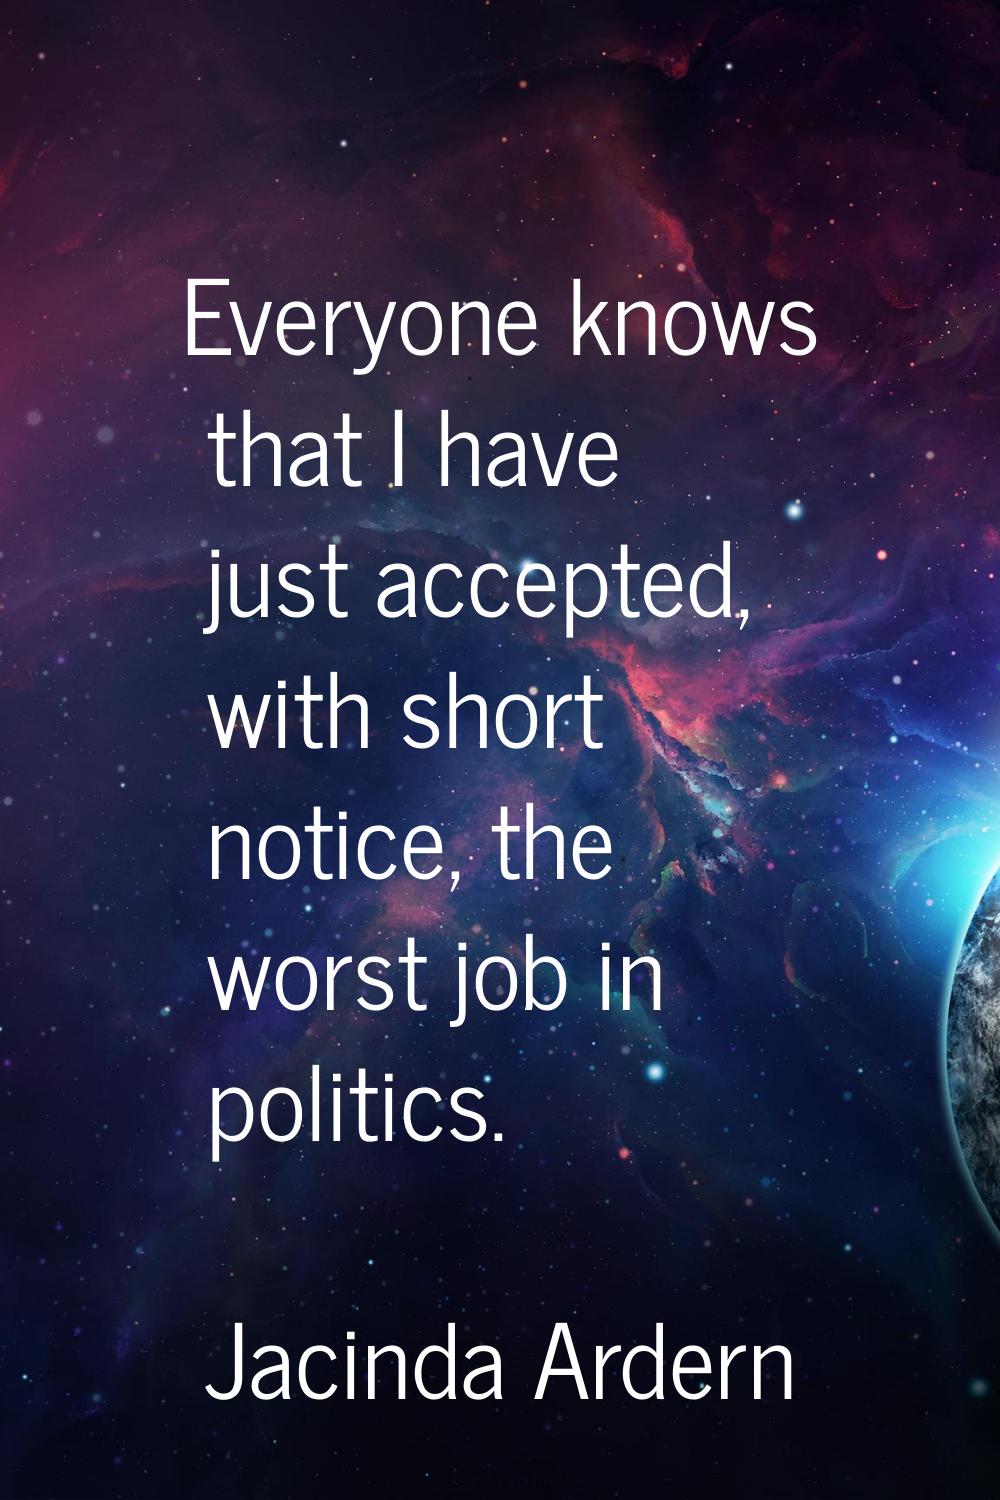 Everyone knows that I have just accepted, with short notice, the worst job in politics.